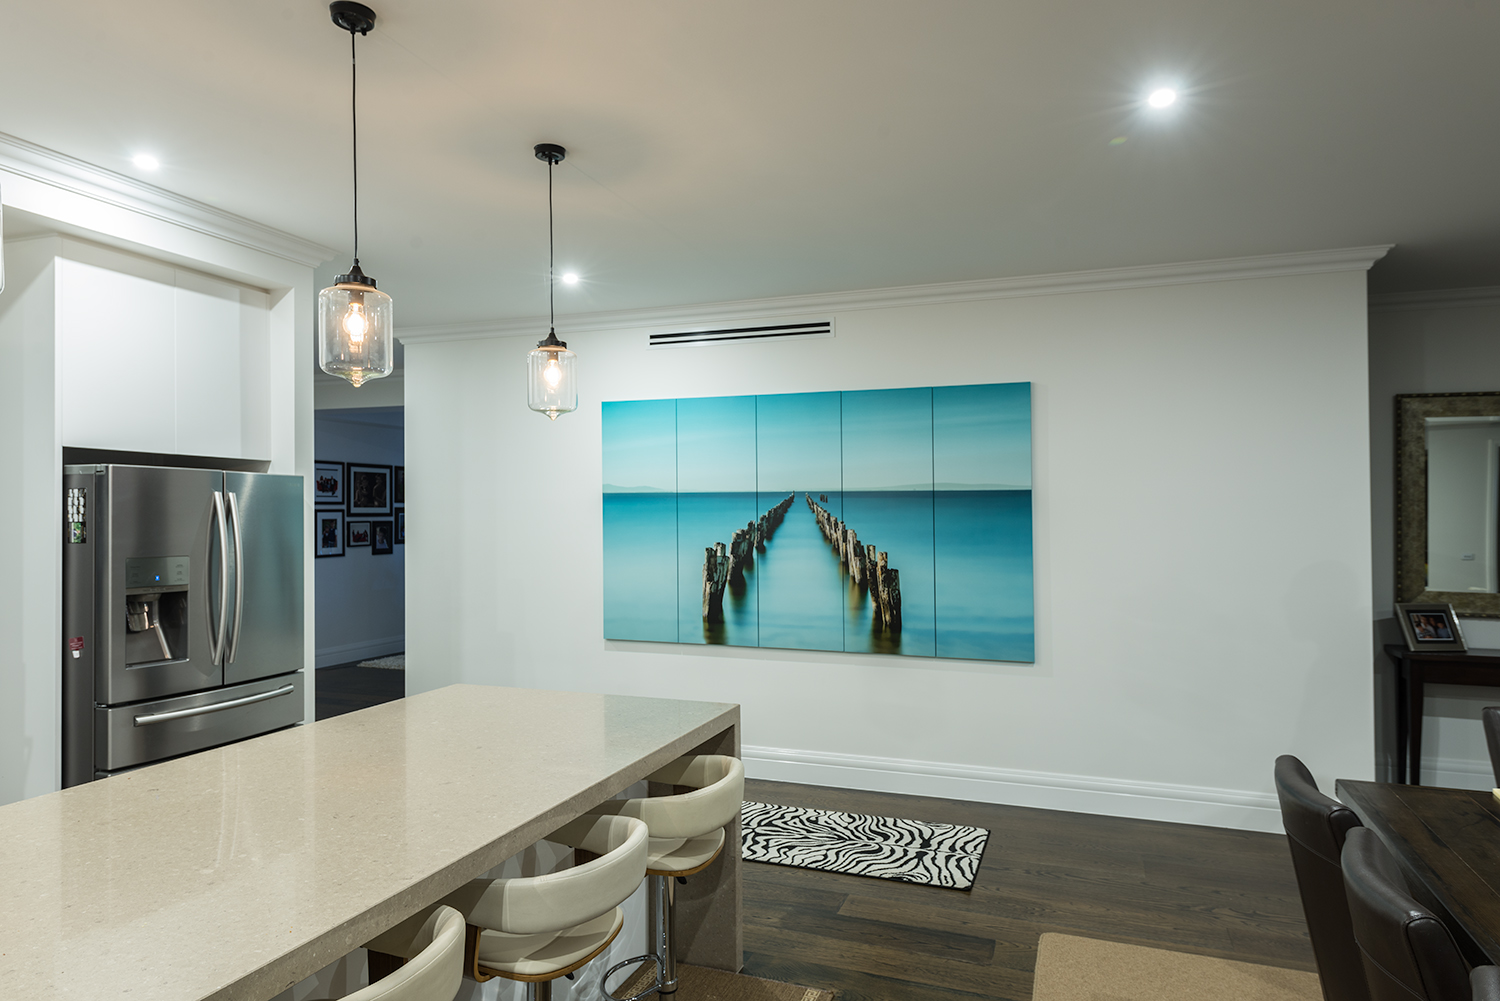 Copy of blissful-bay-stretched-canvas-homes-nikart